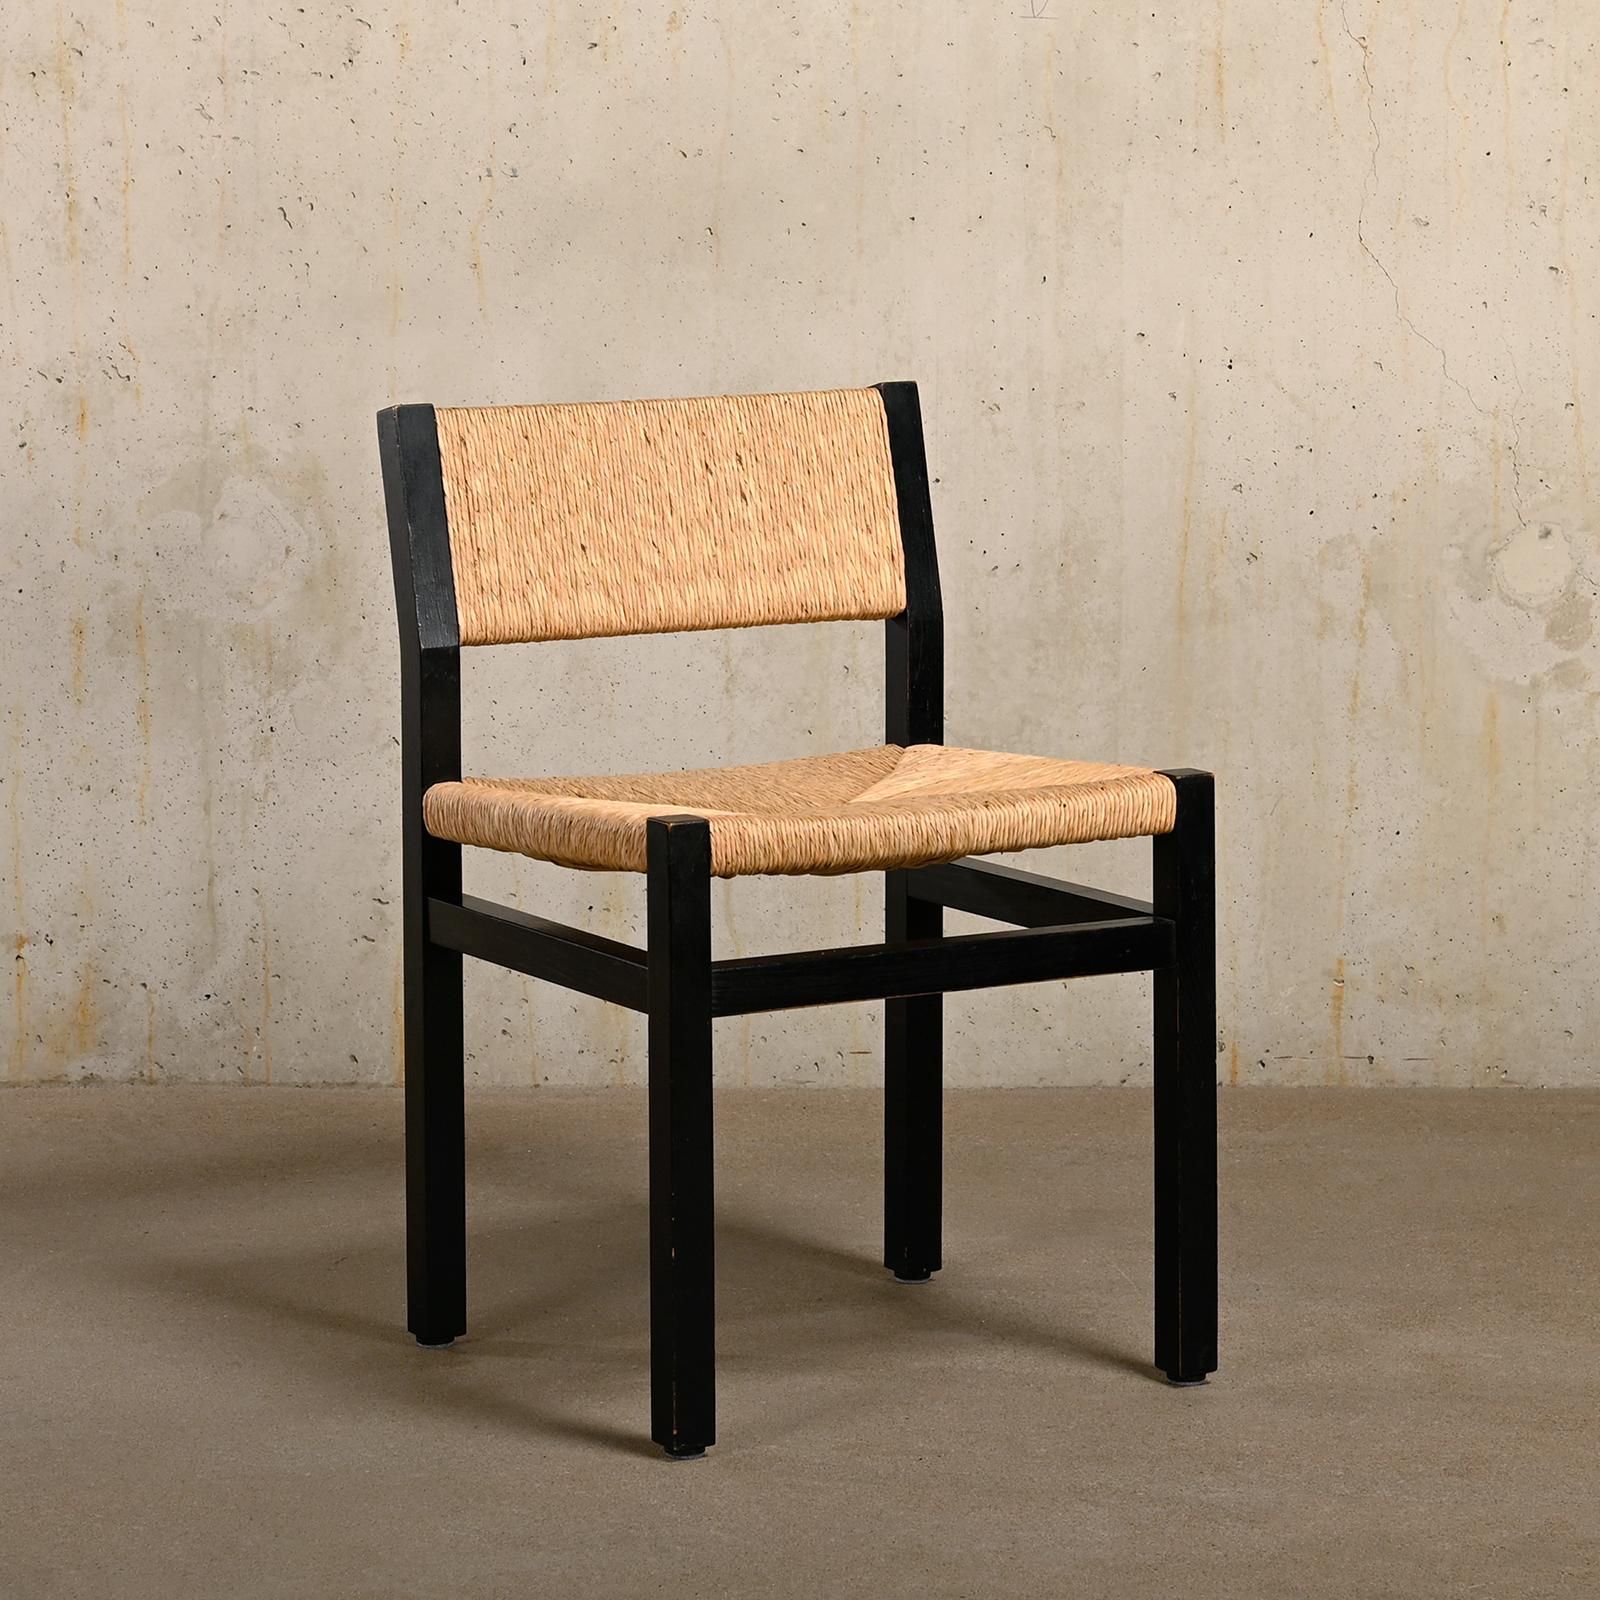 Late 20th Century Martin Visser SE82 Chairs in Black Wood and hand woven Rush Seats for Spectrum For Sale